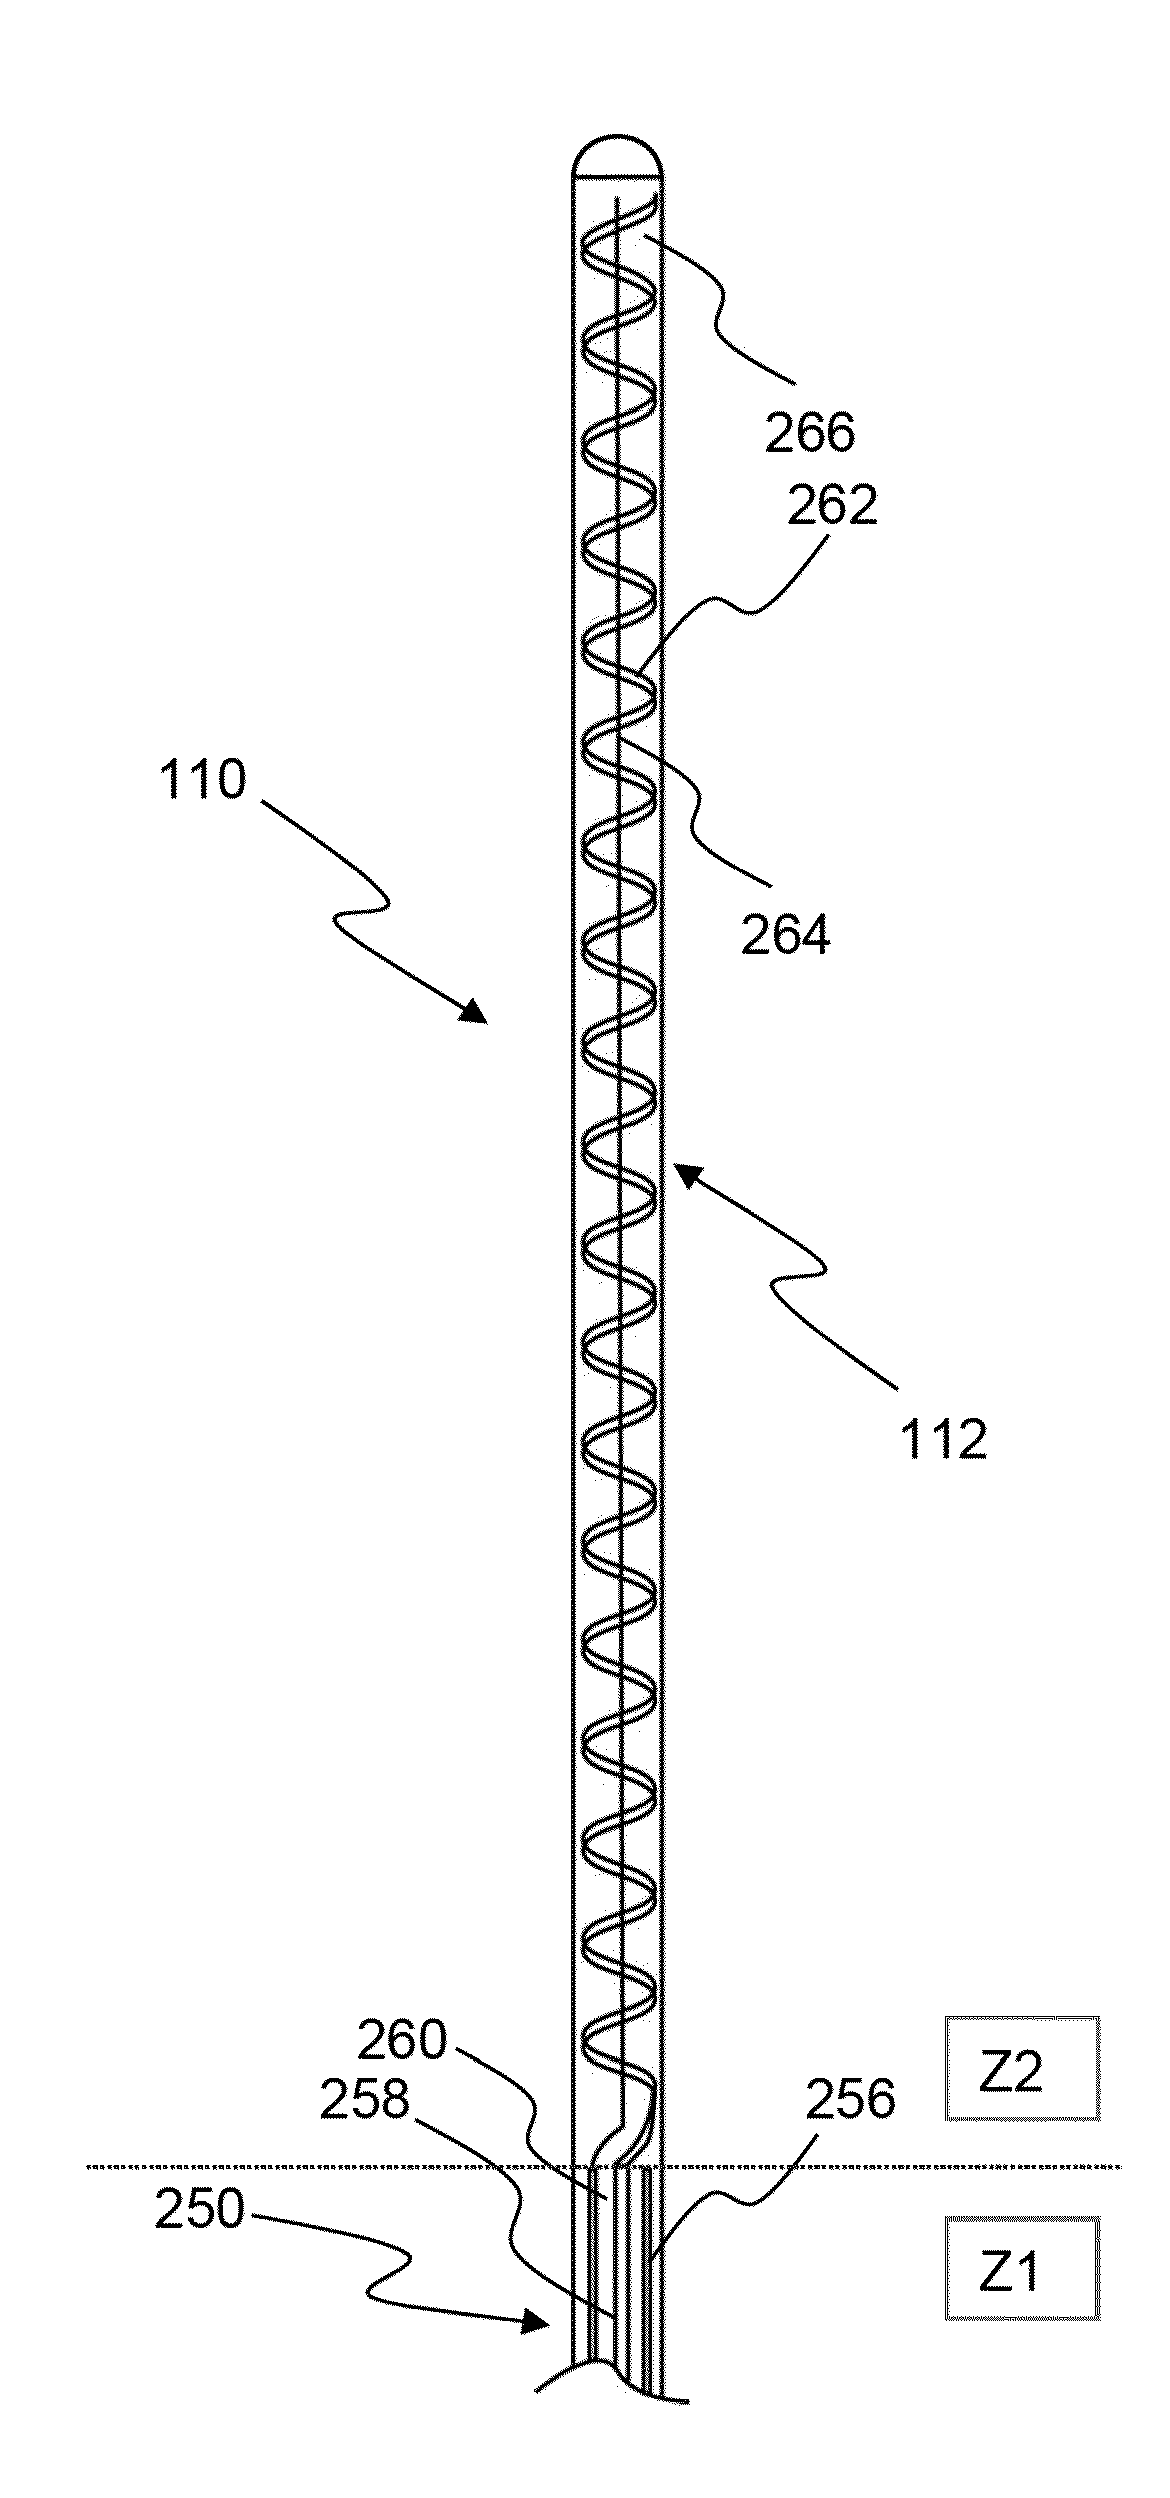 Microwave treatment devices and methods